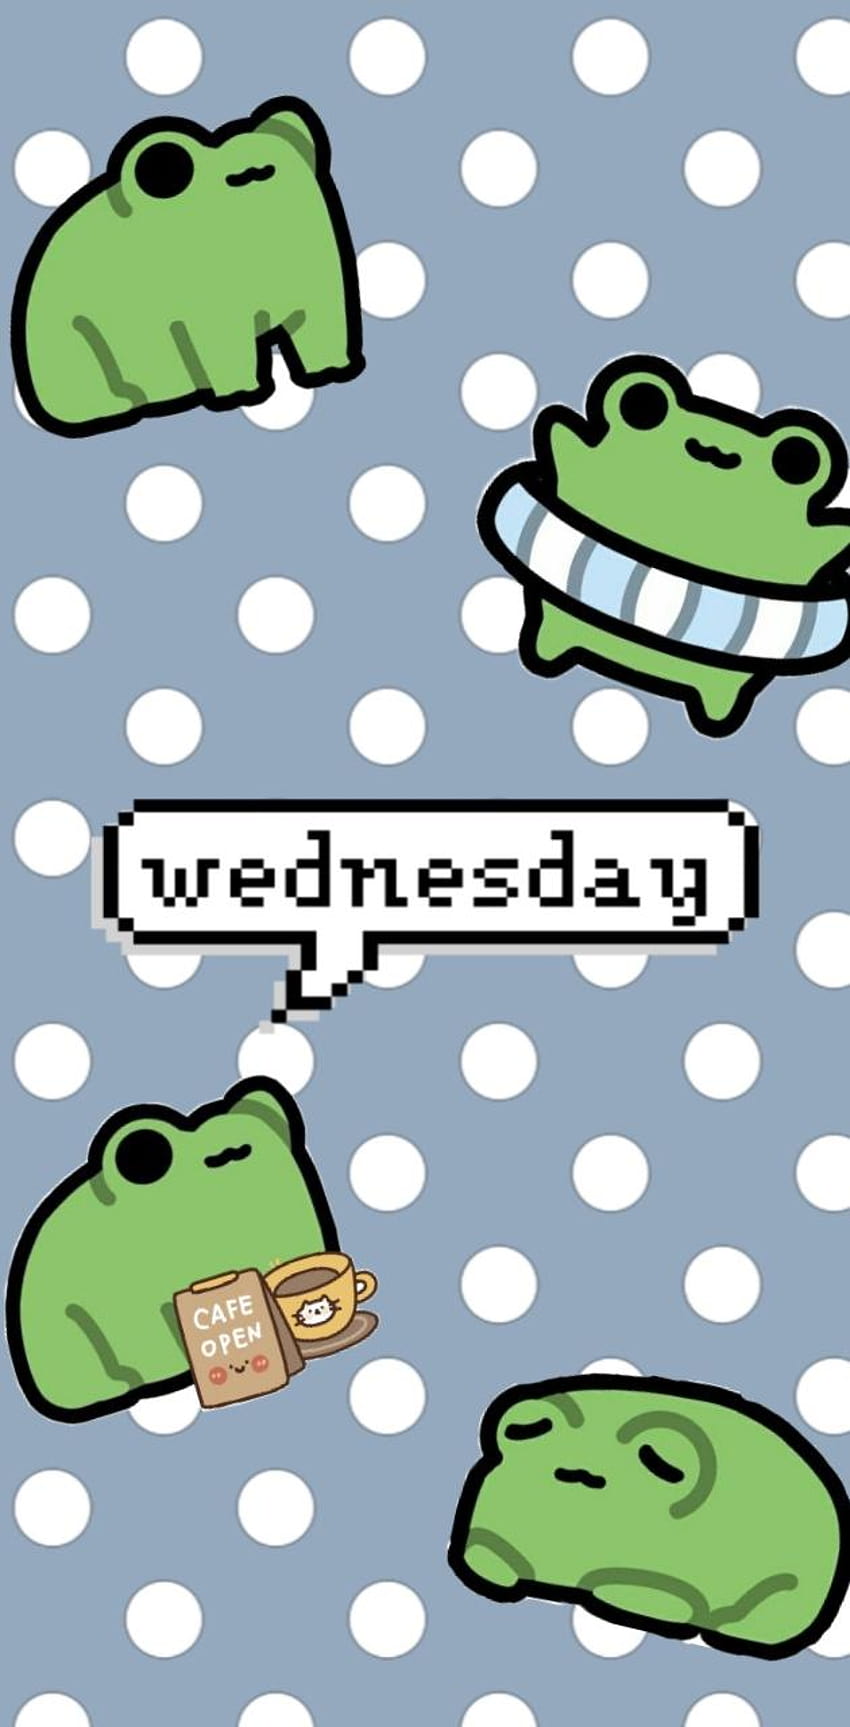 Wednesday wallpaper with cute frog characters on a polka dot background - Frog